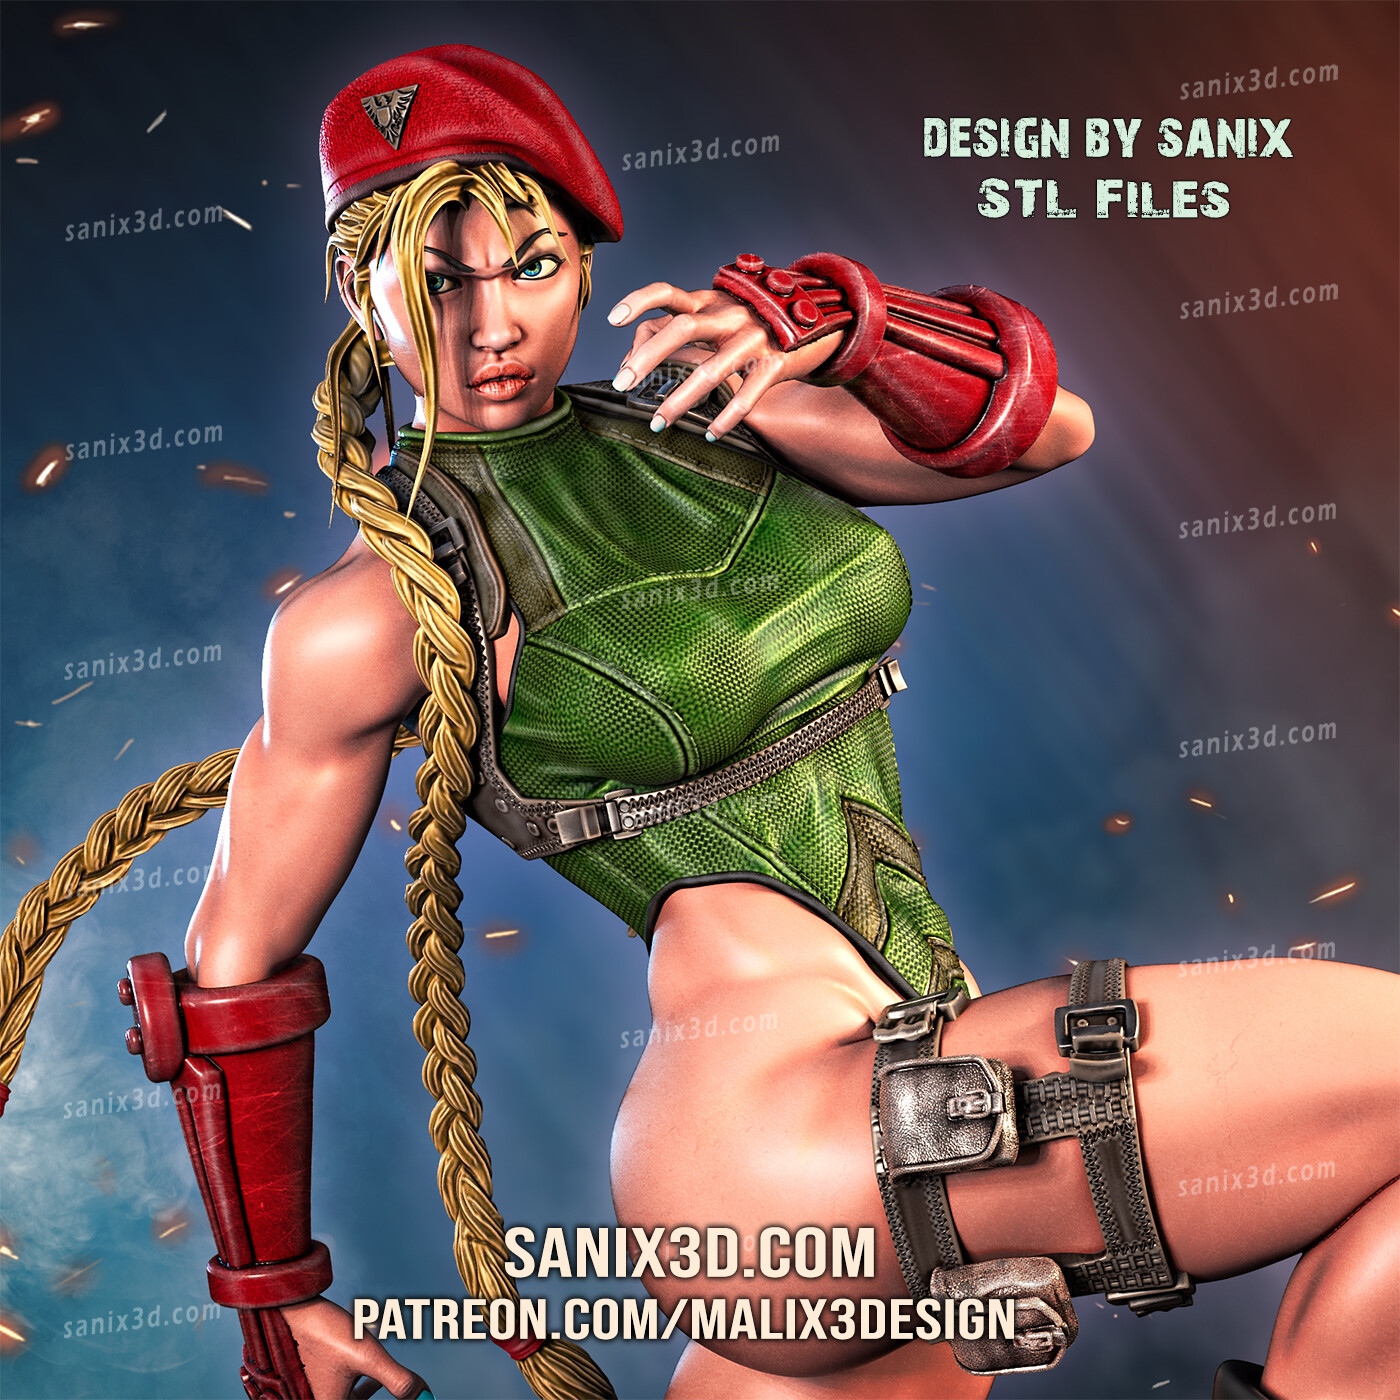 Cammy White - Street Fighter - Image by liangxing #3911370